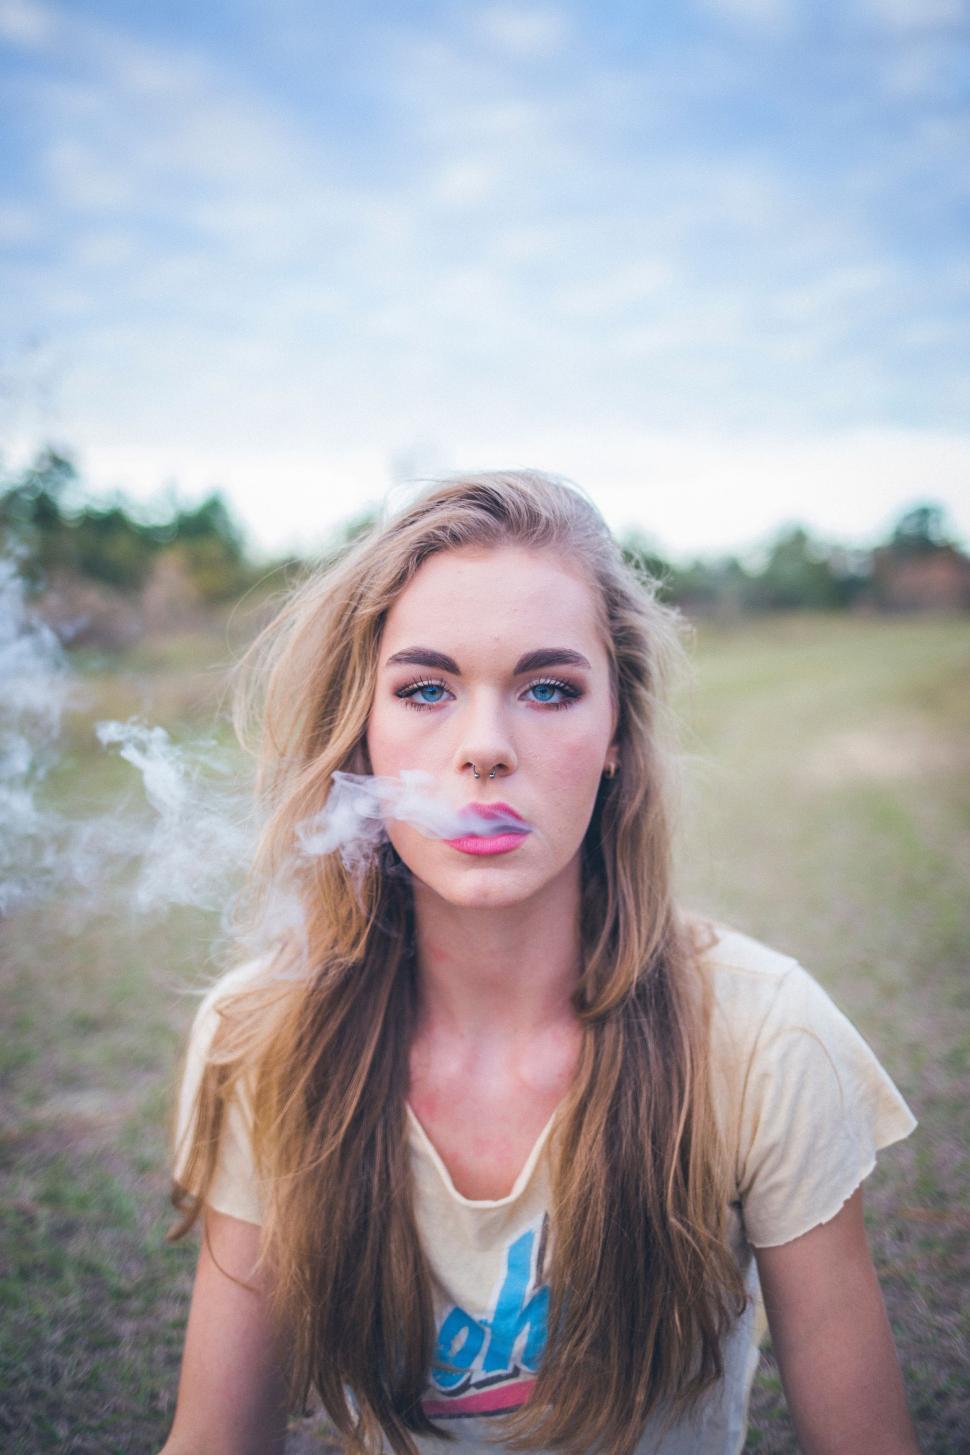 Free Image of Woman Sitting on Ground Smoking a Cigarette 